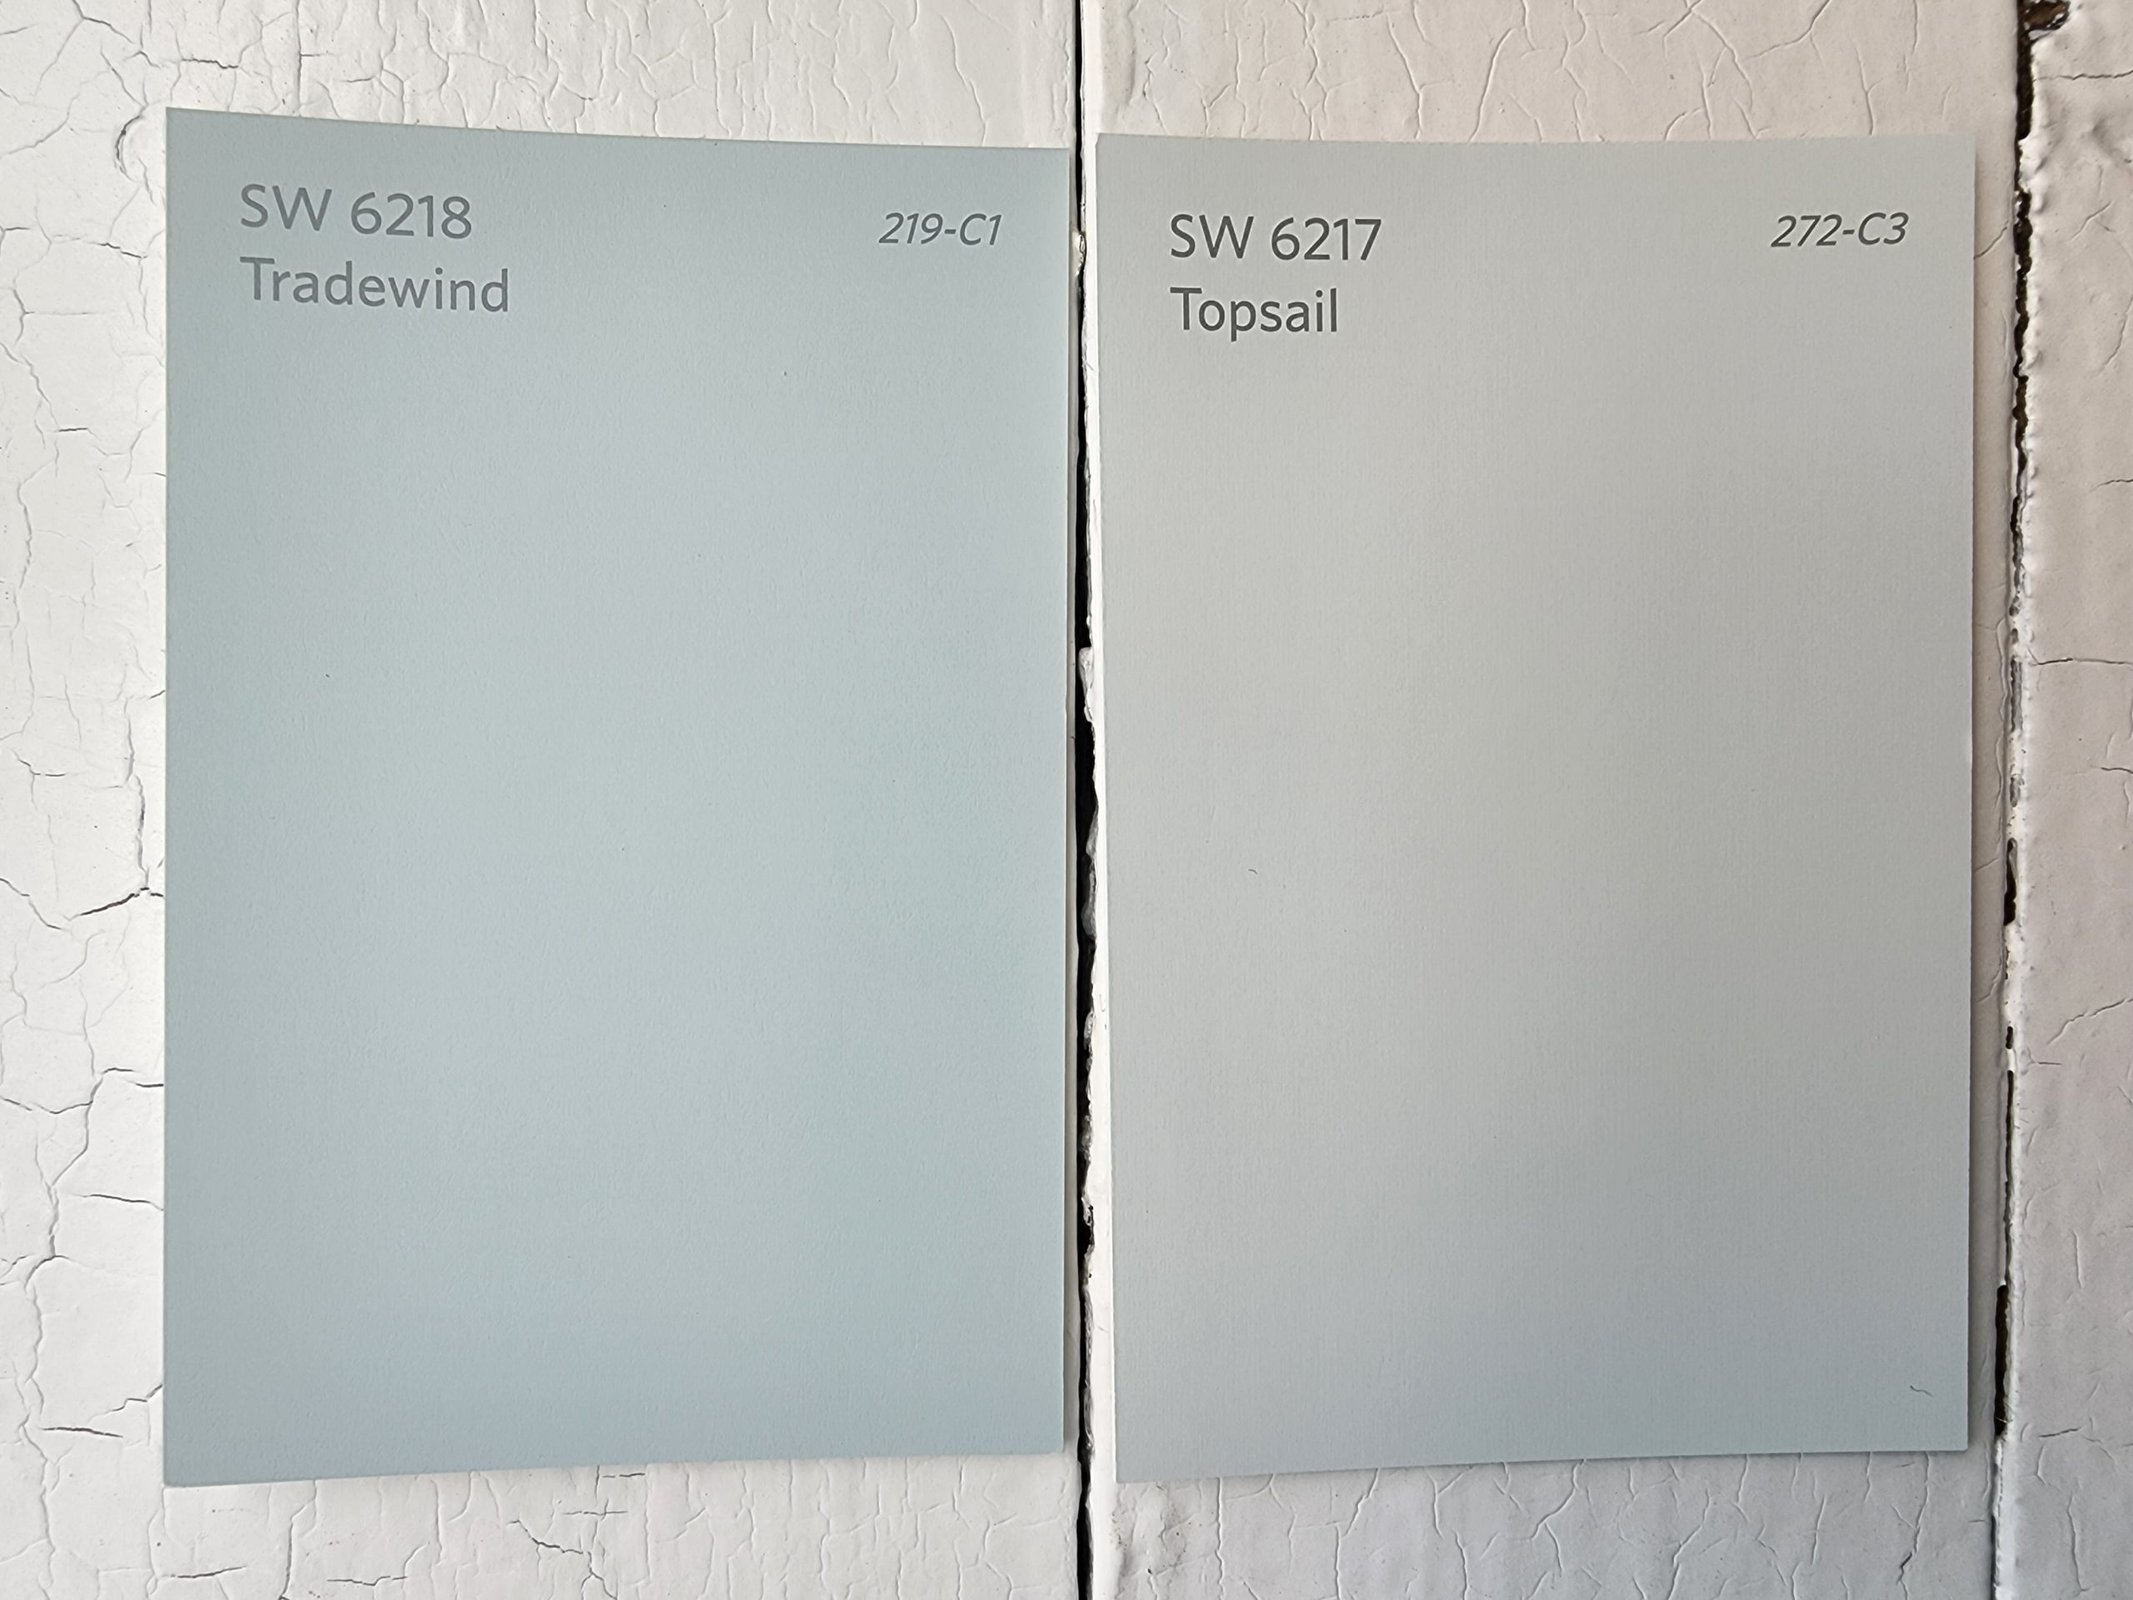  Tradewind vs Topsail by Sherwin Williams scaled